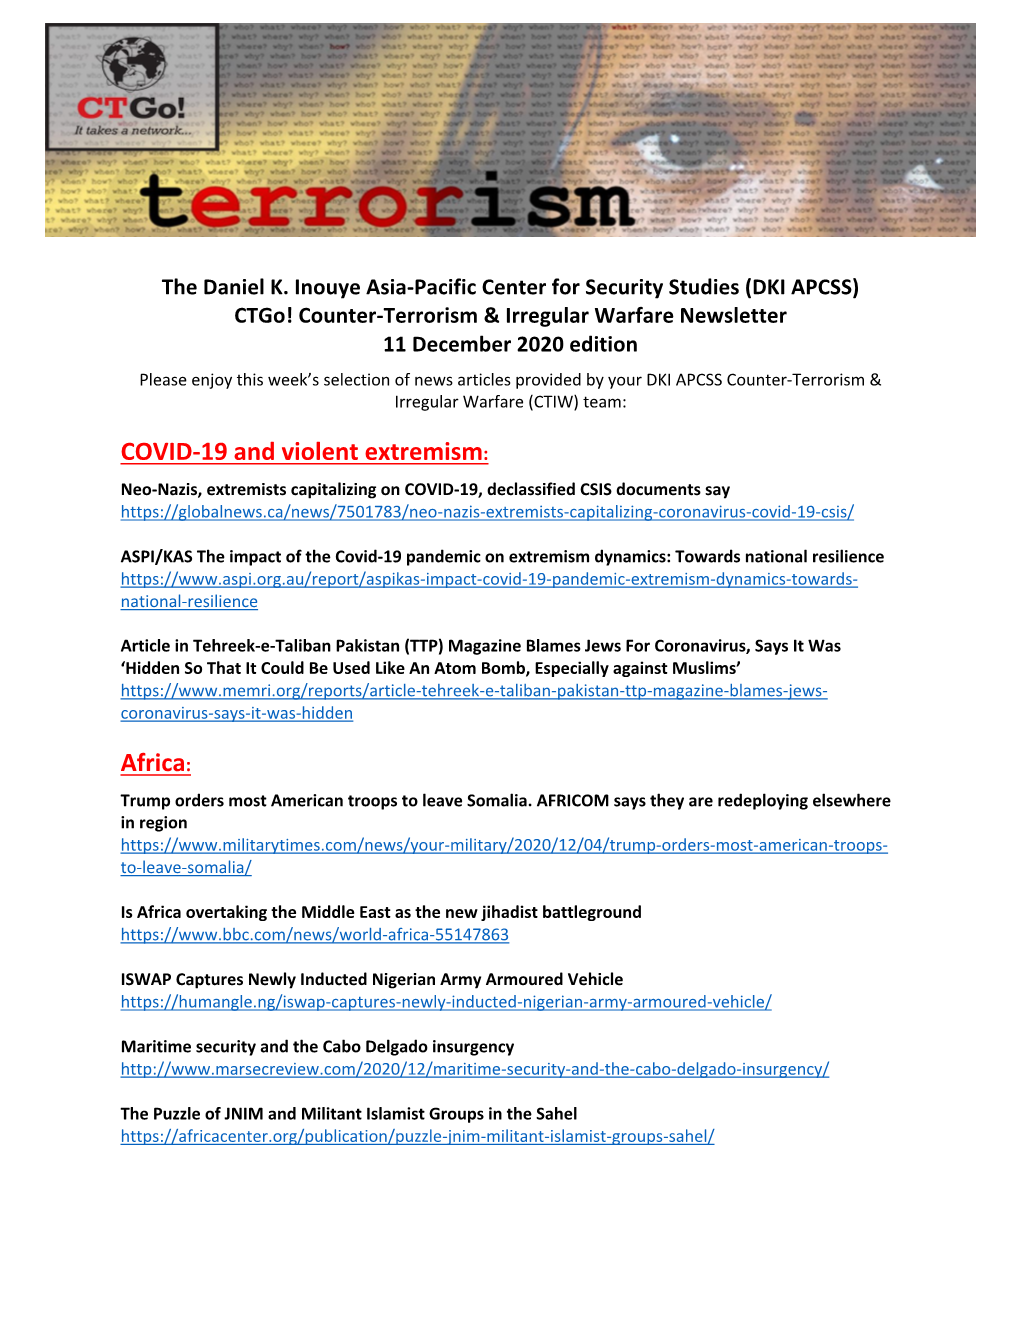 COVID-19 and Violent Extremism